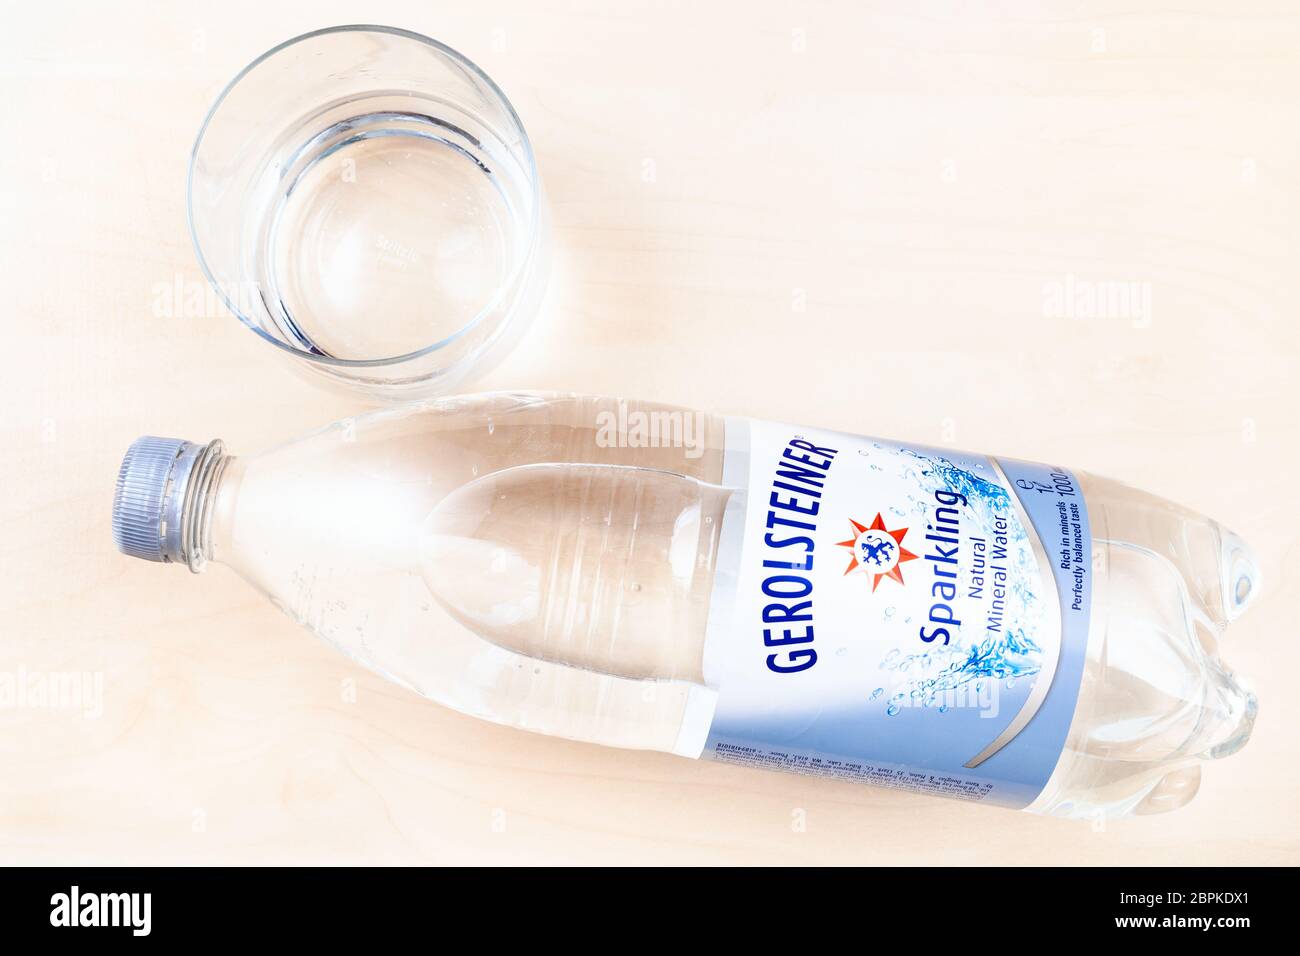 MOSCOW, RUSSIA - MAY 10, 2020: lying plastic bottle of Gerolsteiner Sprudel sparkling water and glass on board. Gerolsteiner is German naturally carbo Stock Photo